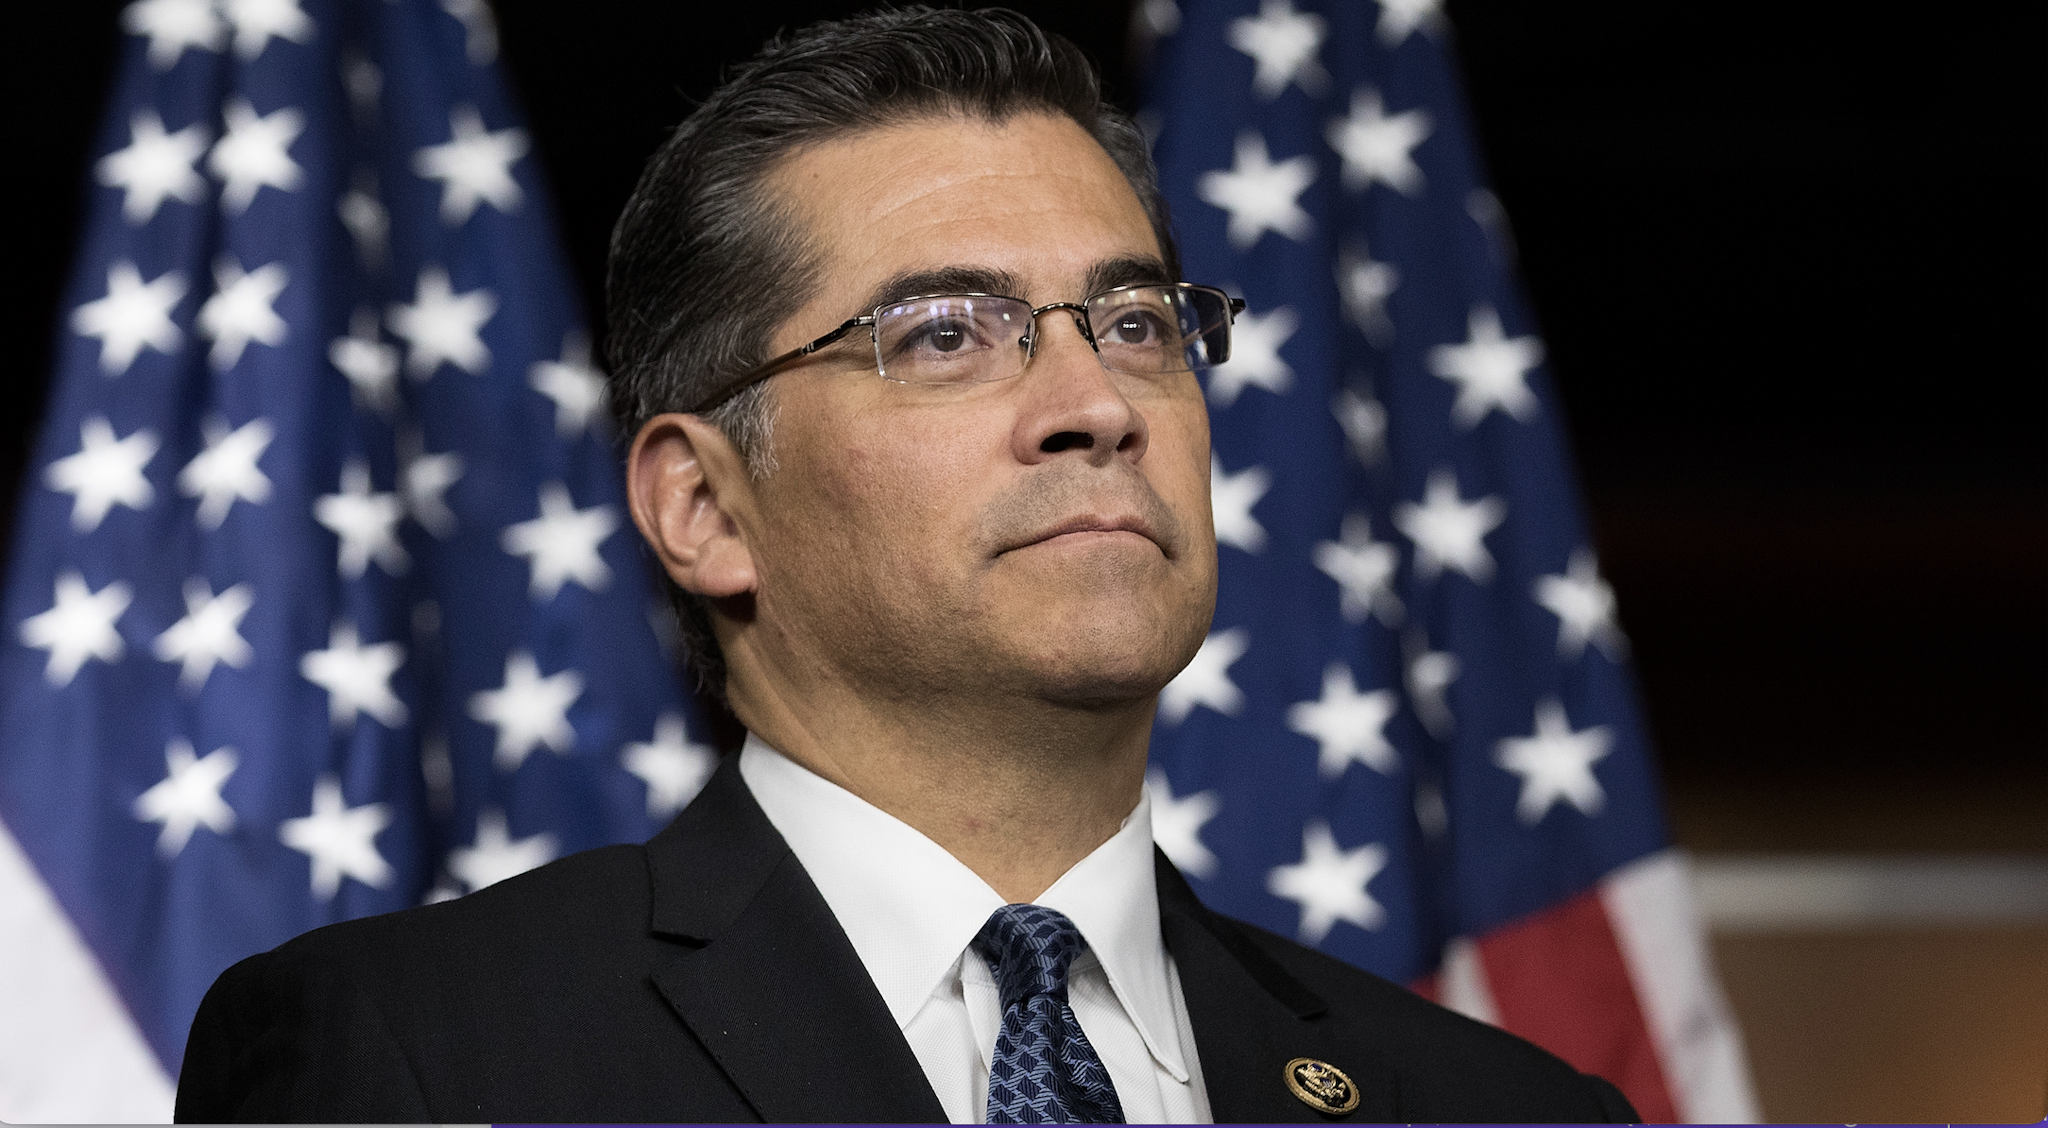 Rep. Xavier Becerra (D-CA) listens during a news conference to discuss the rhetoric of presidential candidate Donald Trump, at the U.S. Capitol, May 11, 2016, in Washington, DC.